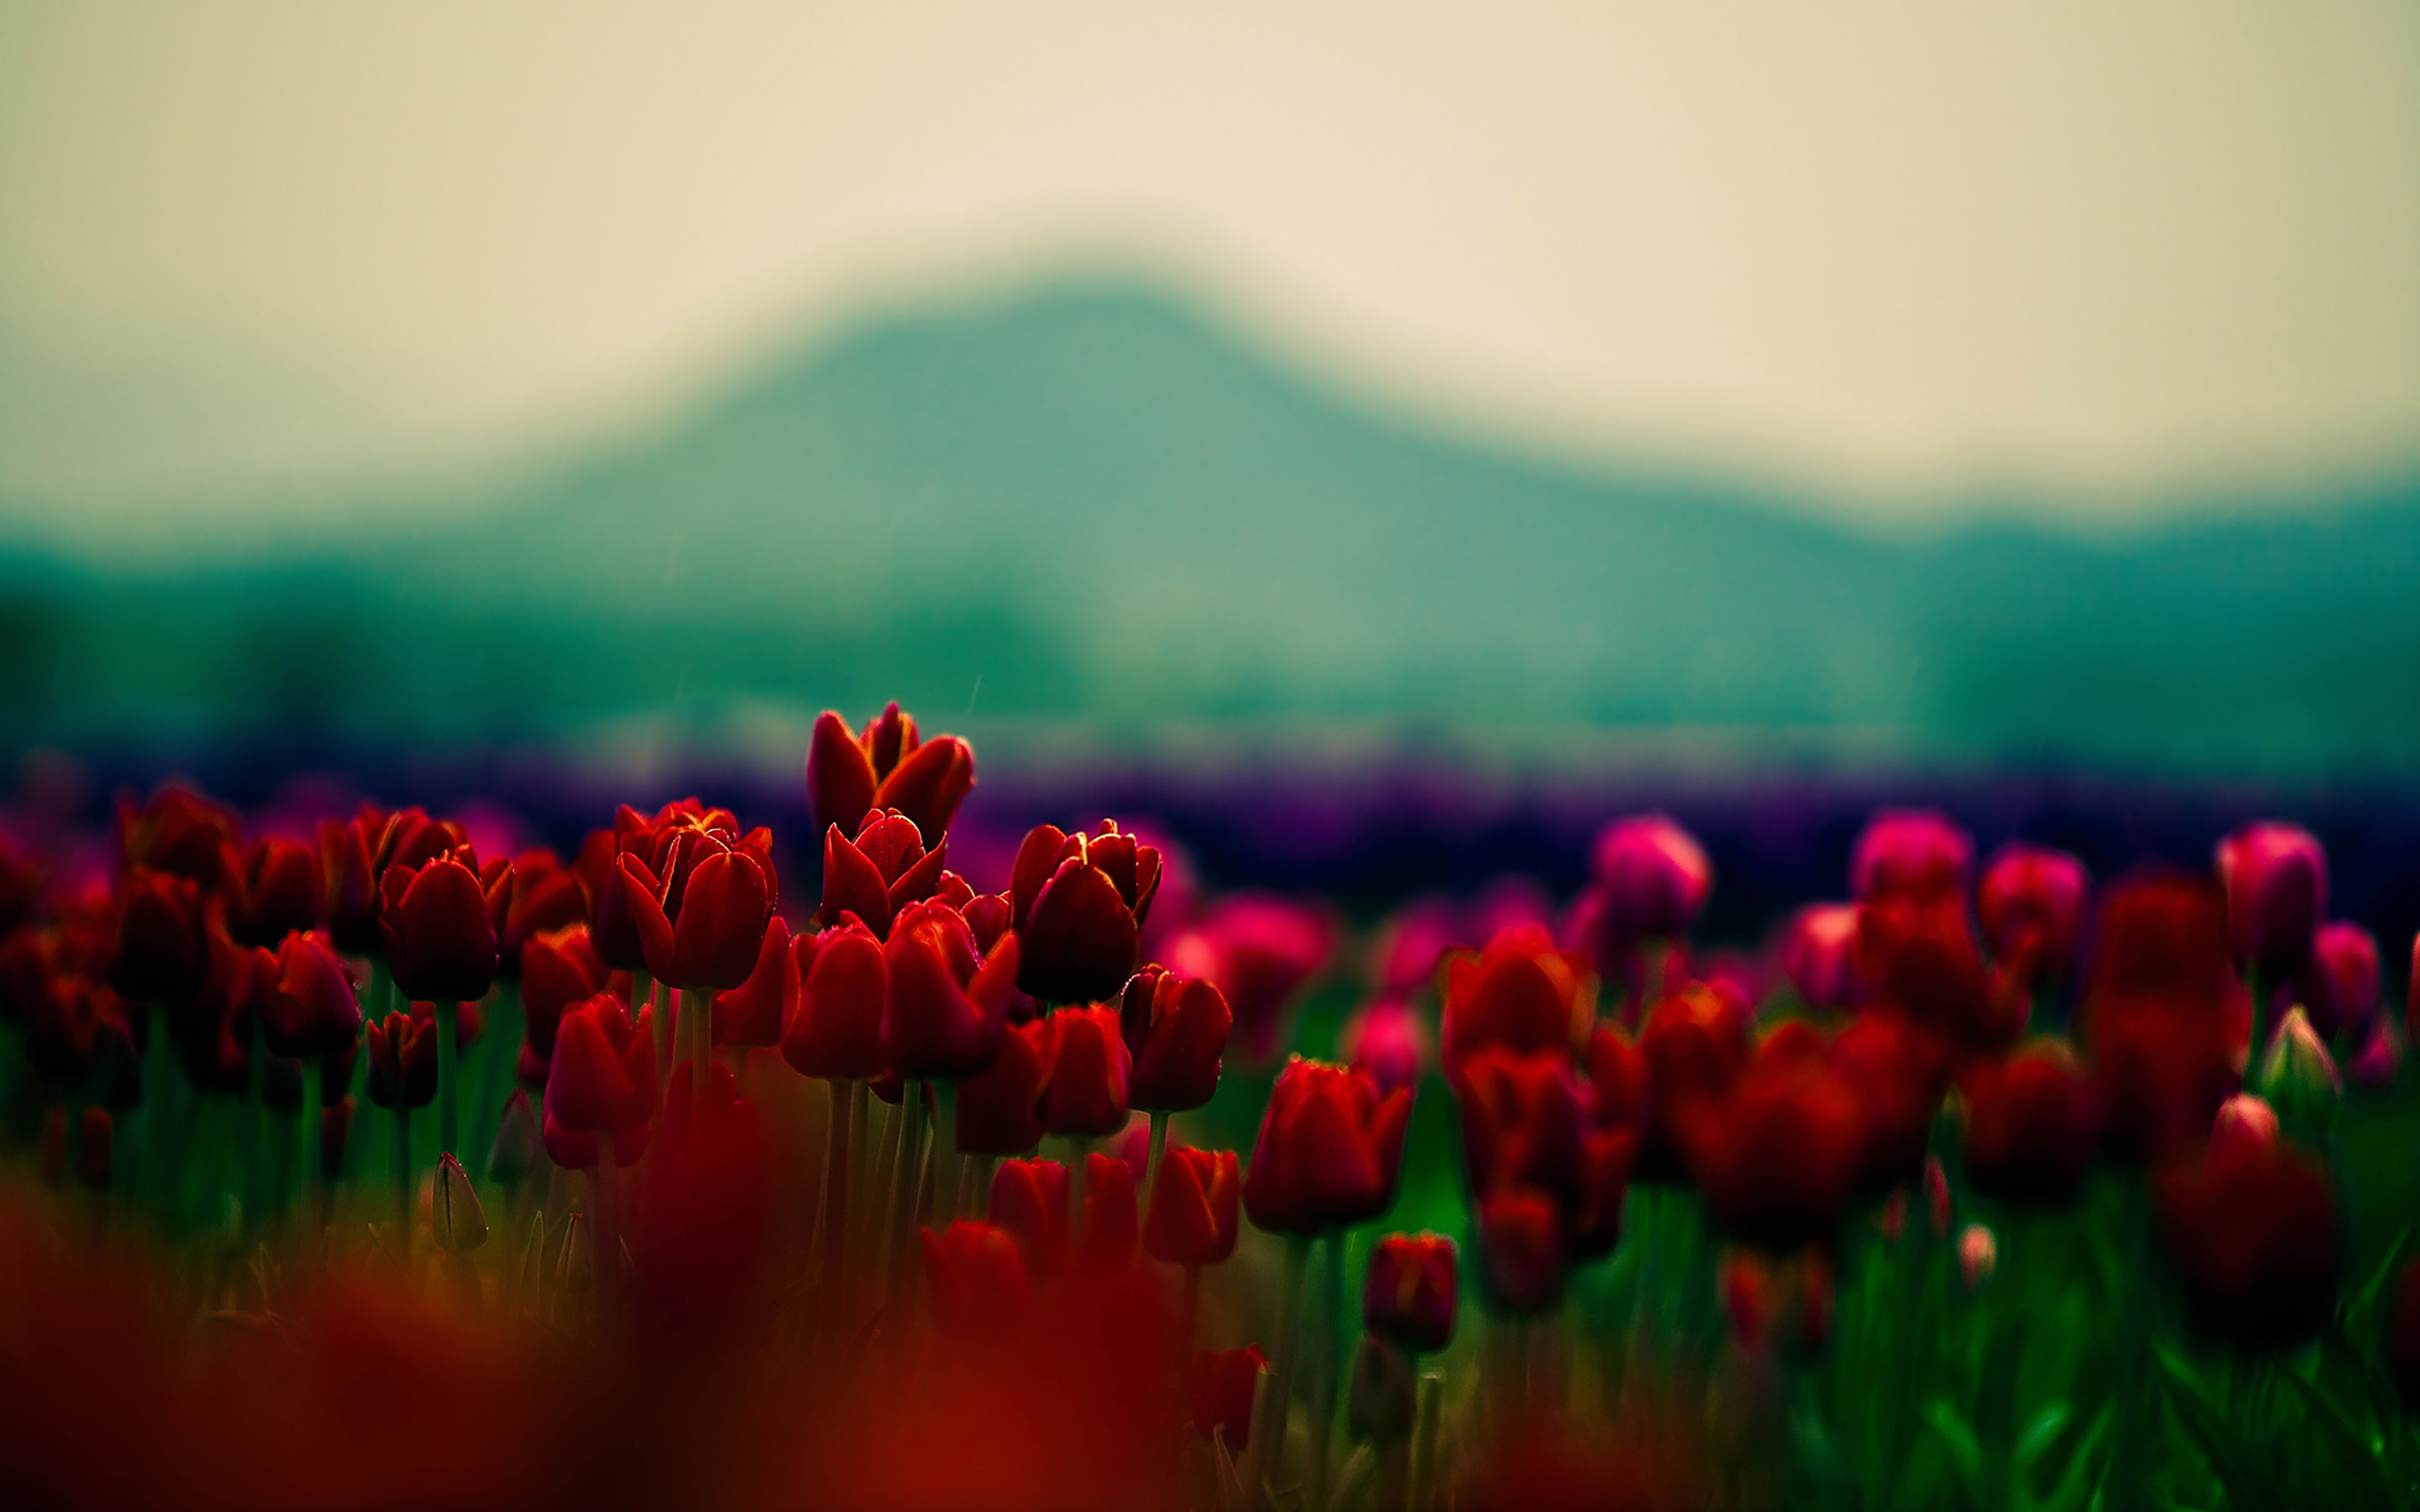 High Resolution Flowers Hd Backgrounds - Hd Wallpapers Red Flowers - HD Wallpaper 